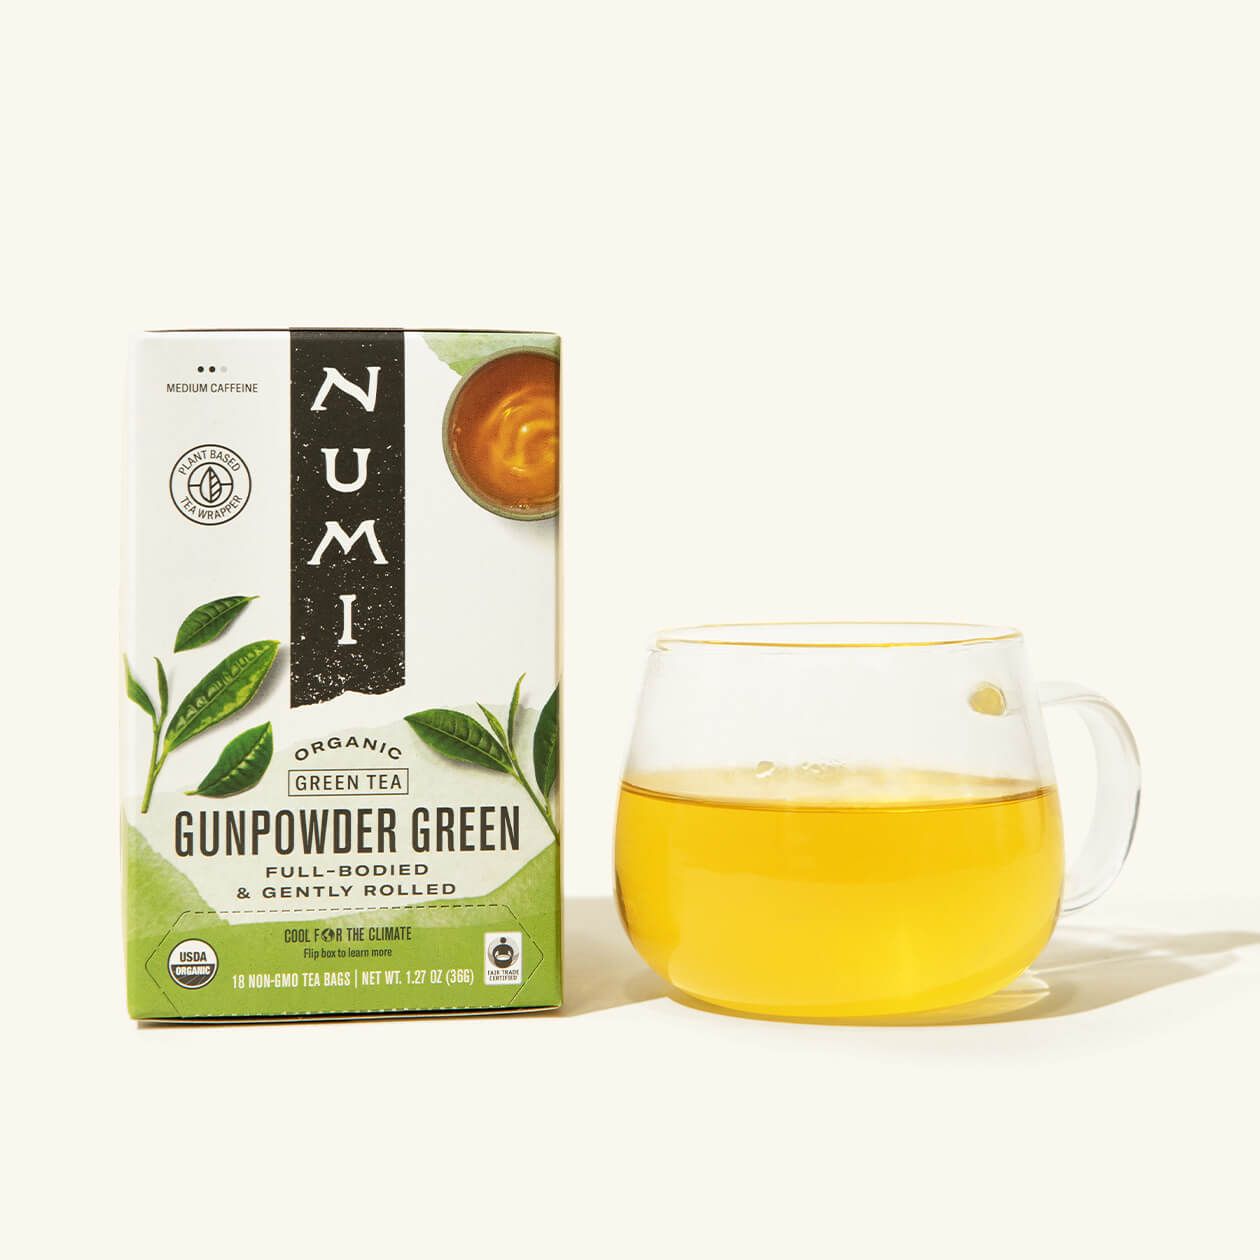 A box of Numi's Gunpowder Green next to a brewed cup of tea in a clear cup